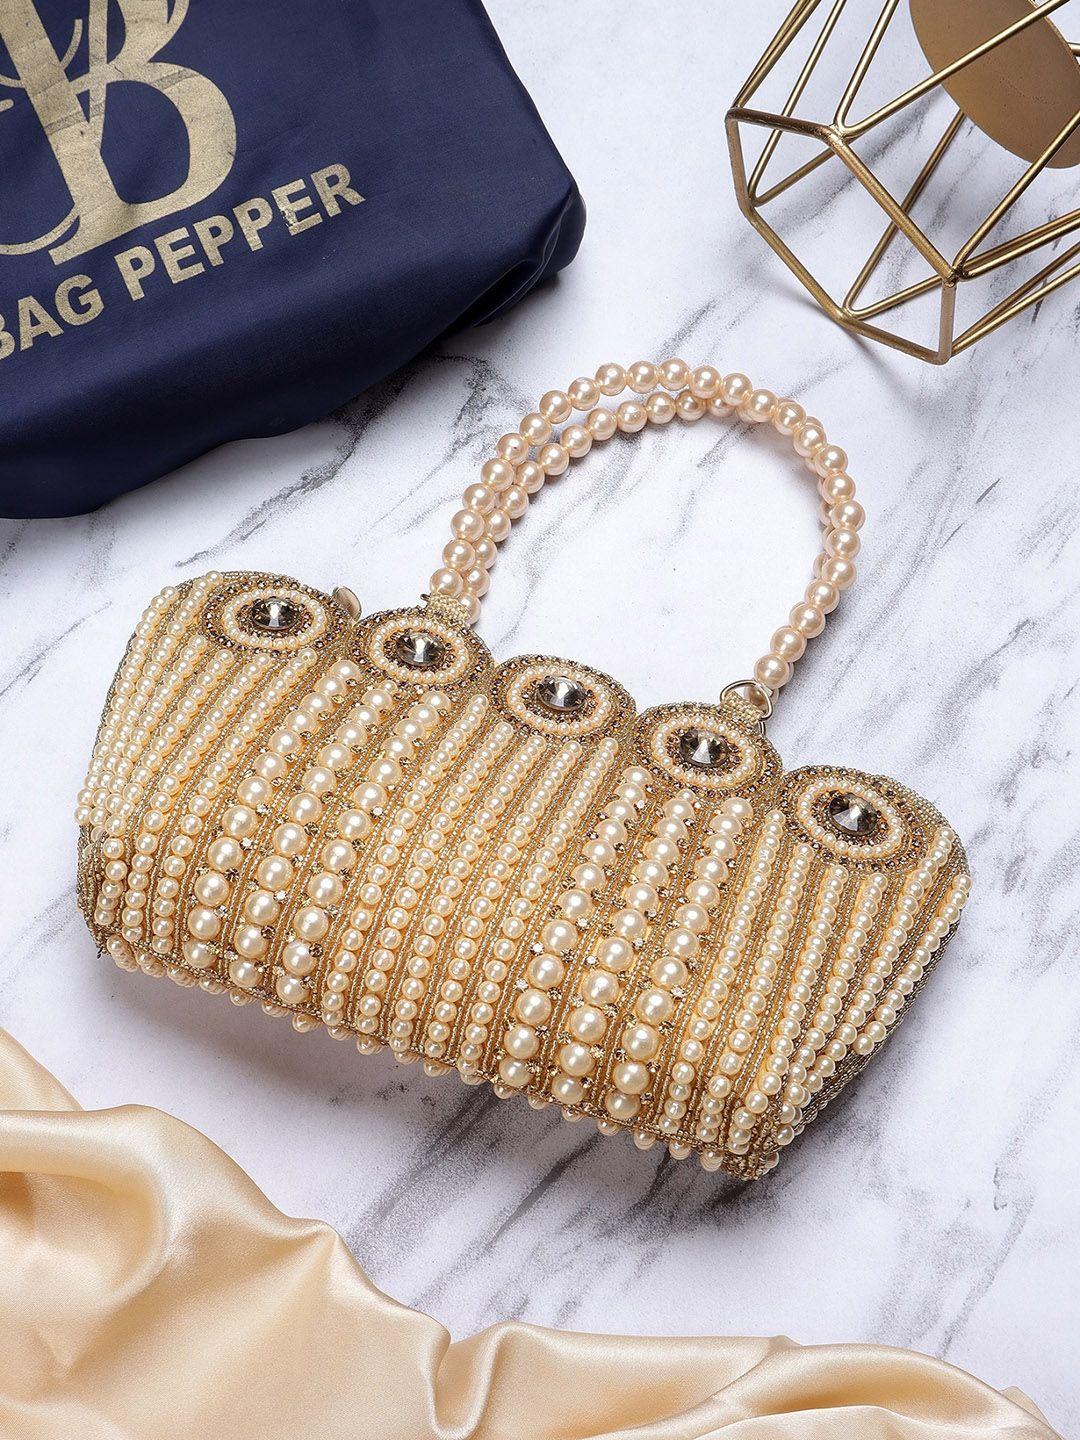 bag pepper gold-toned pu bucket handheld bag with quilted